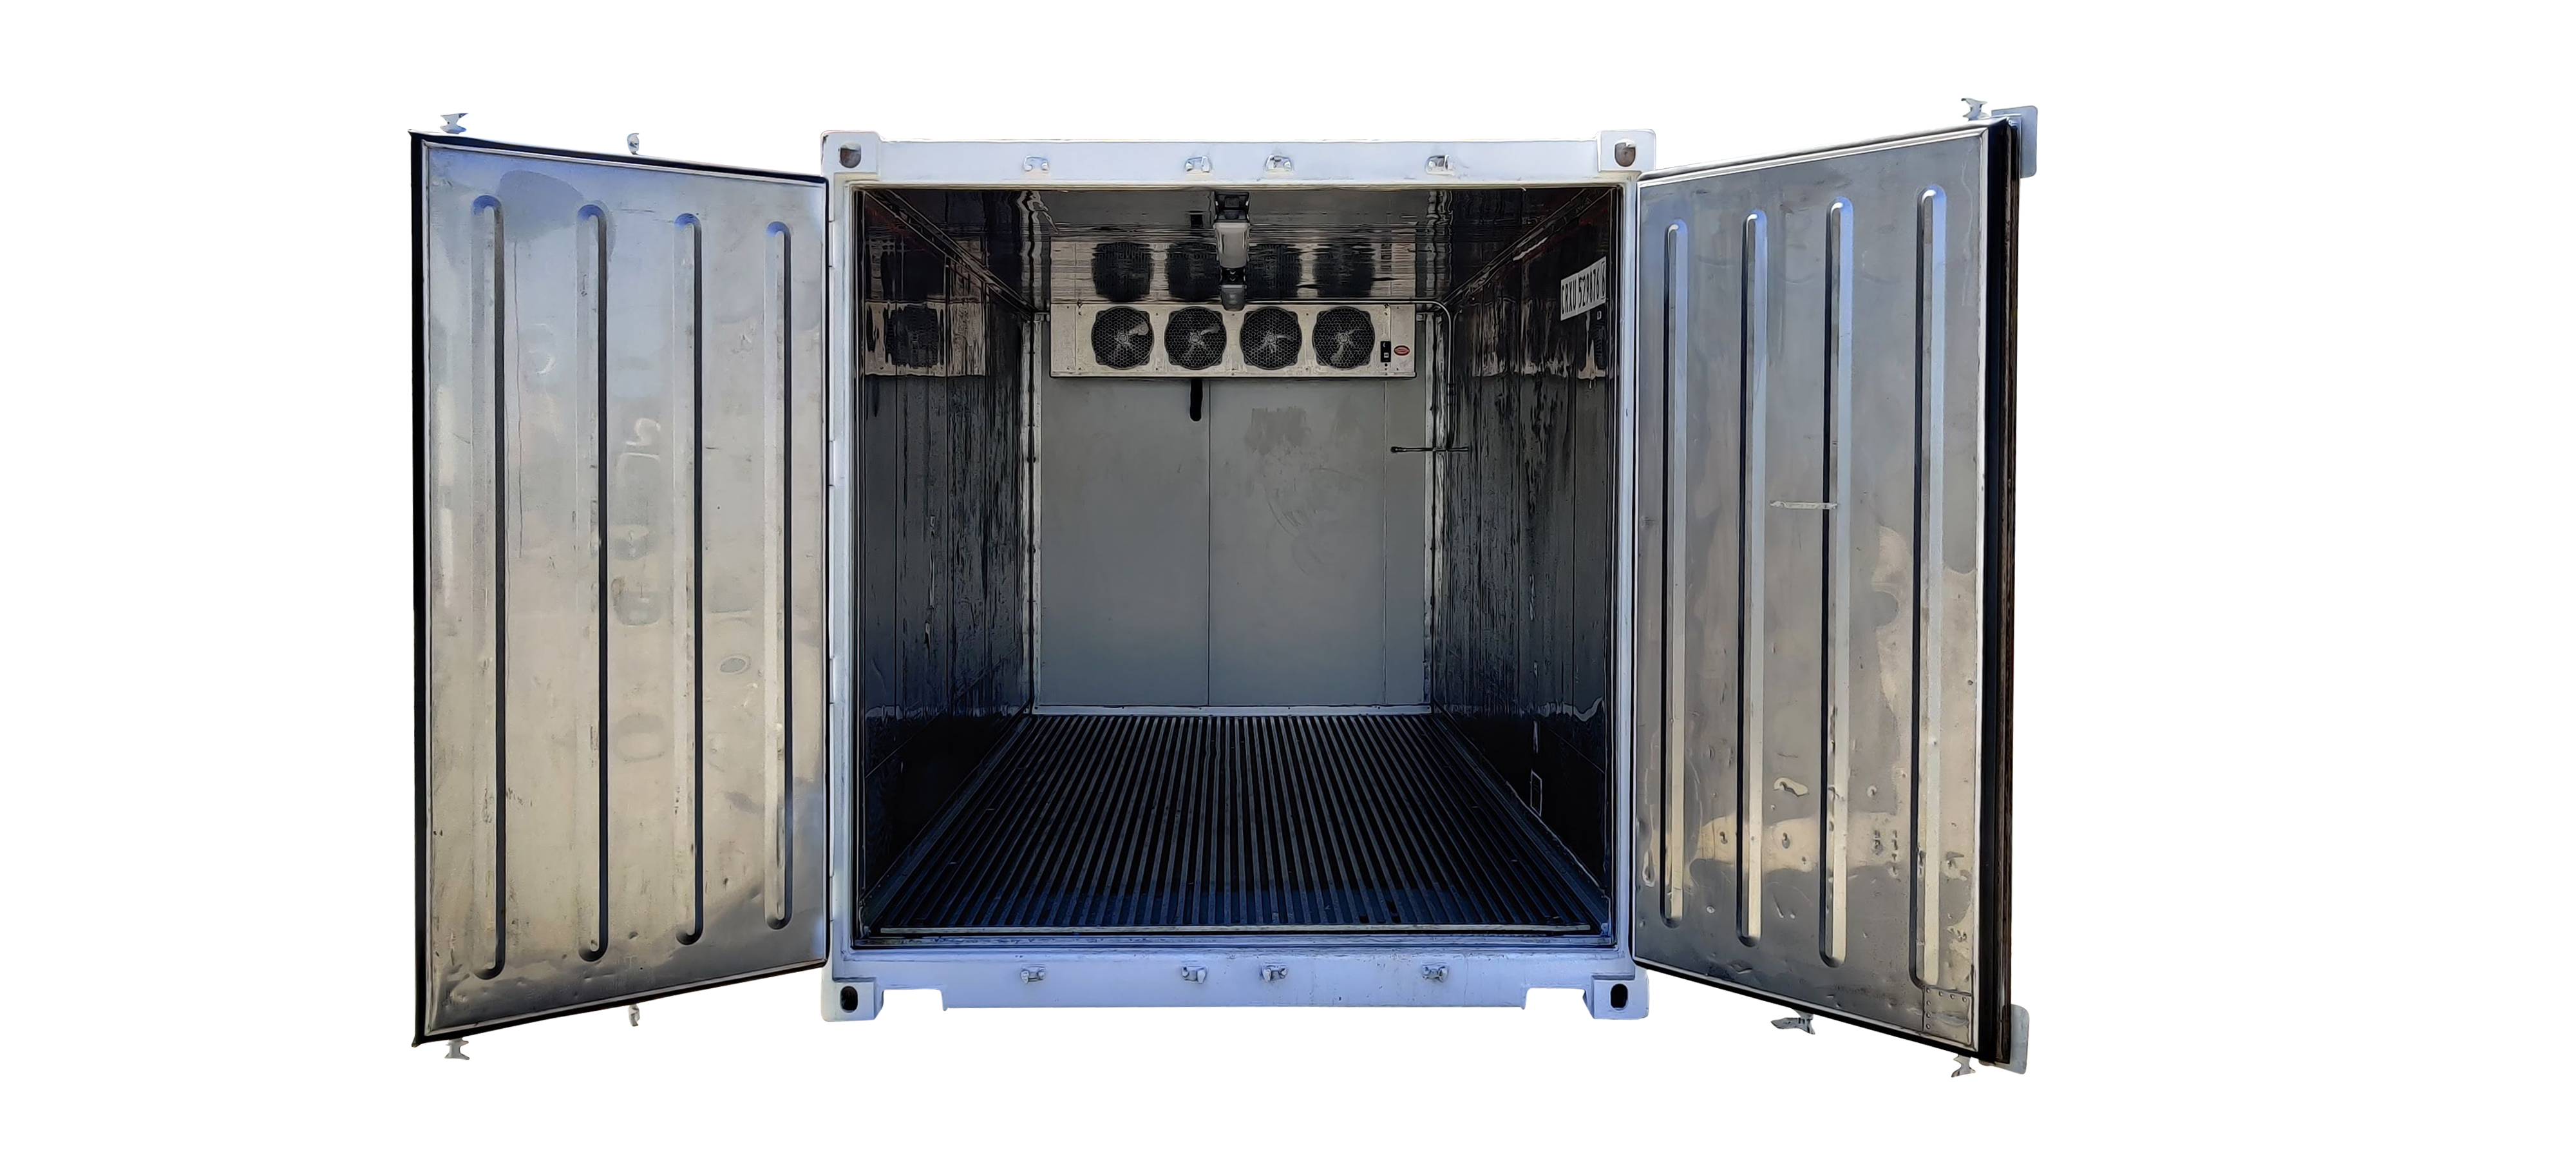 20ft refrigerated container cold storage box 220v single phase